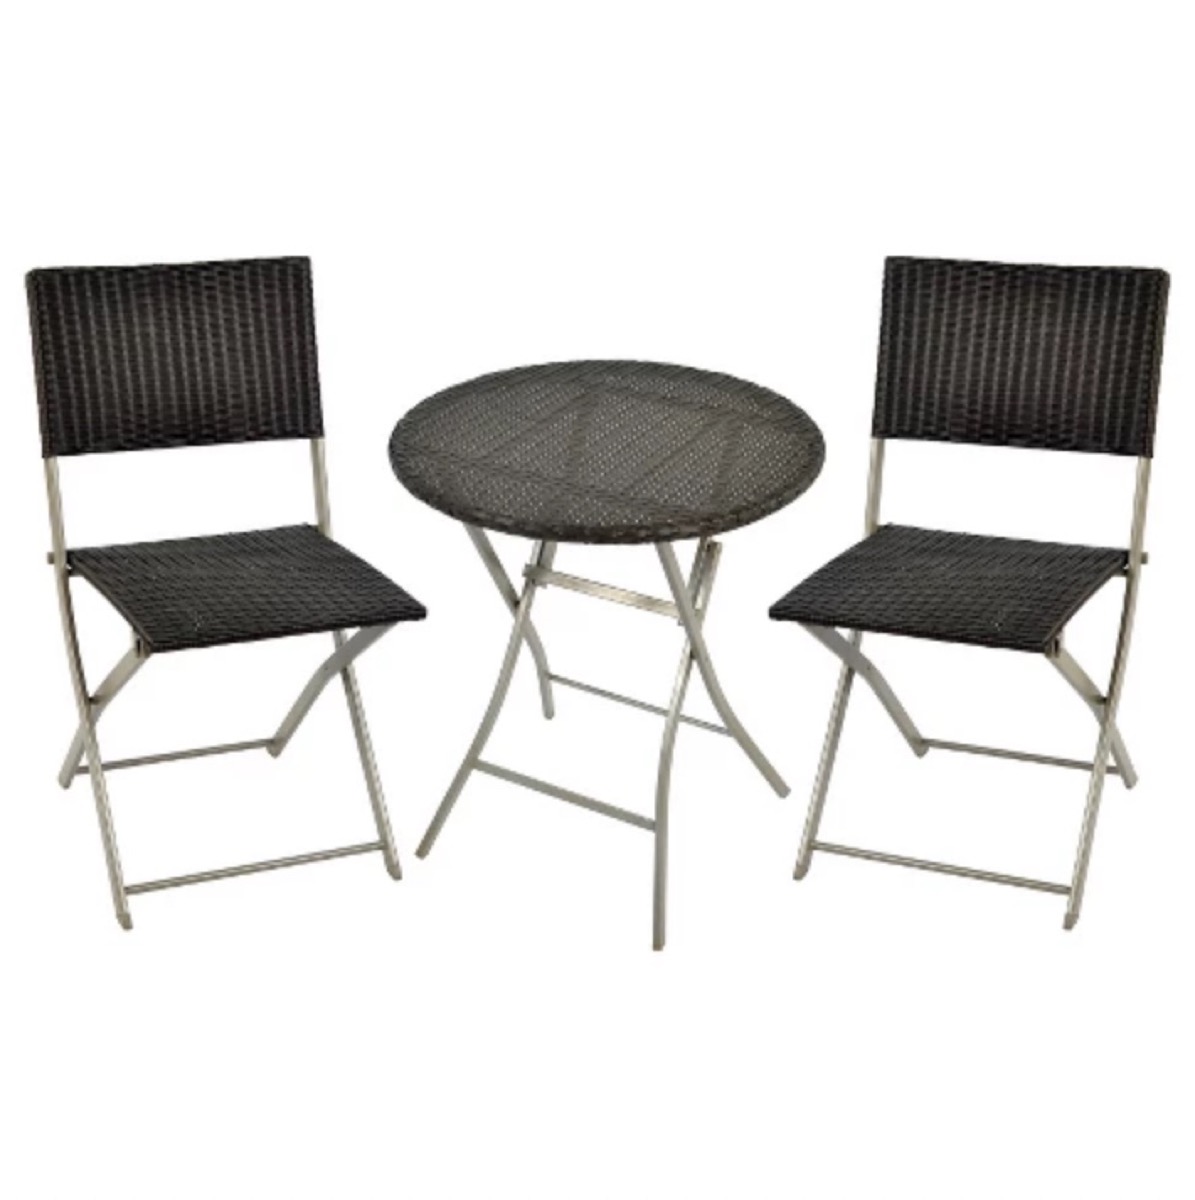 two wicker chairs and a round table